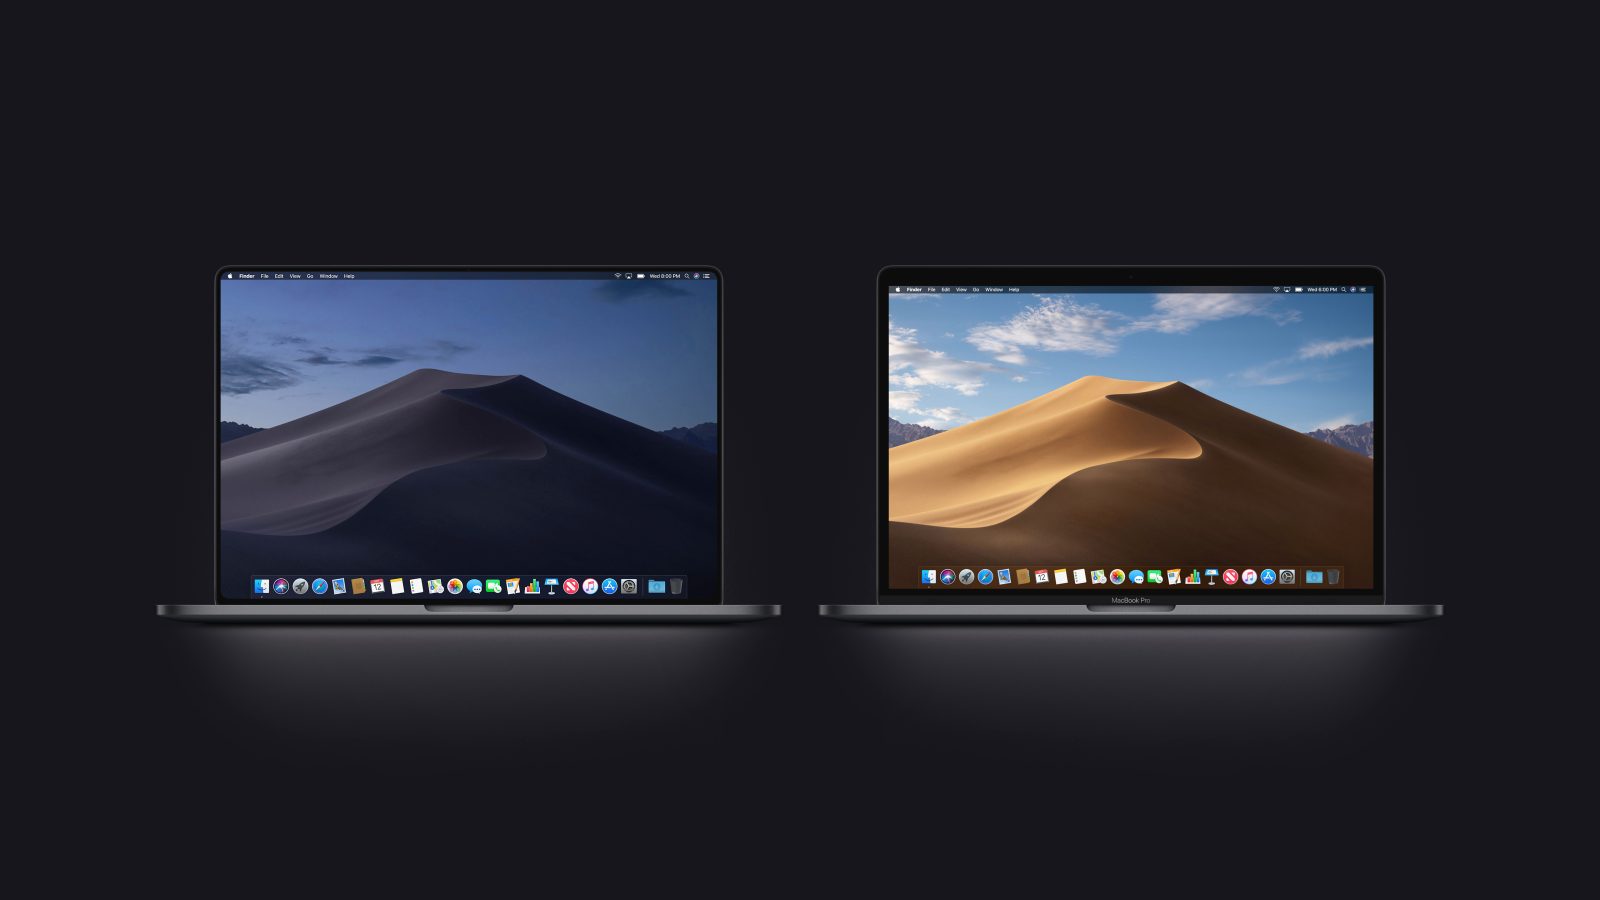 16-inch MacBook Pro with the new design is the Biggest 2019 Prediction